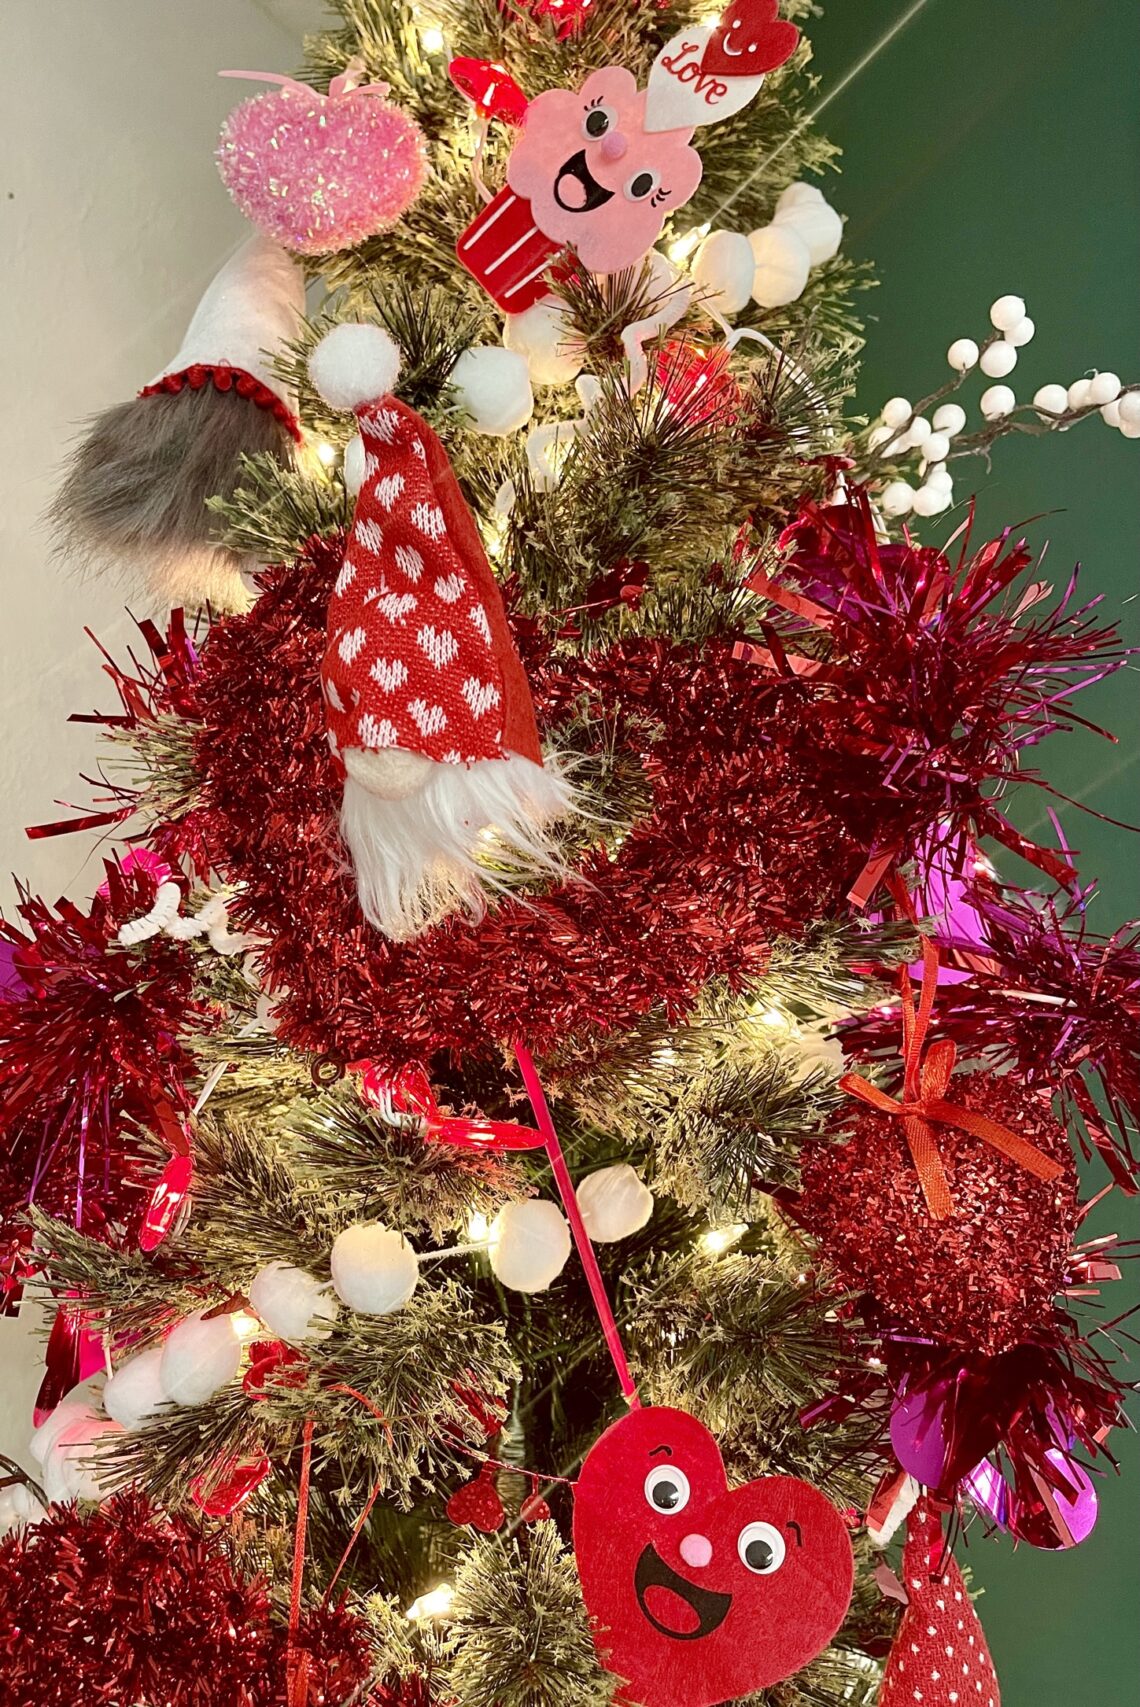 People Are Repurposing Their Christmas Trees For Valentine's Day